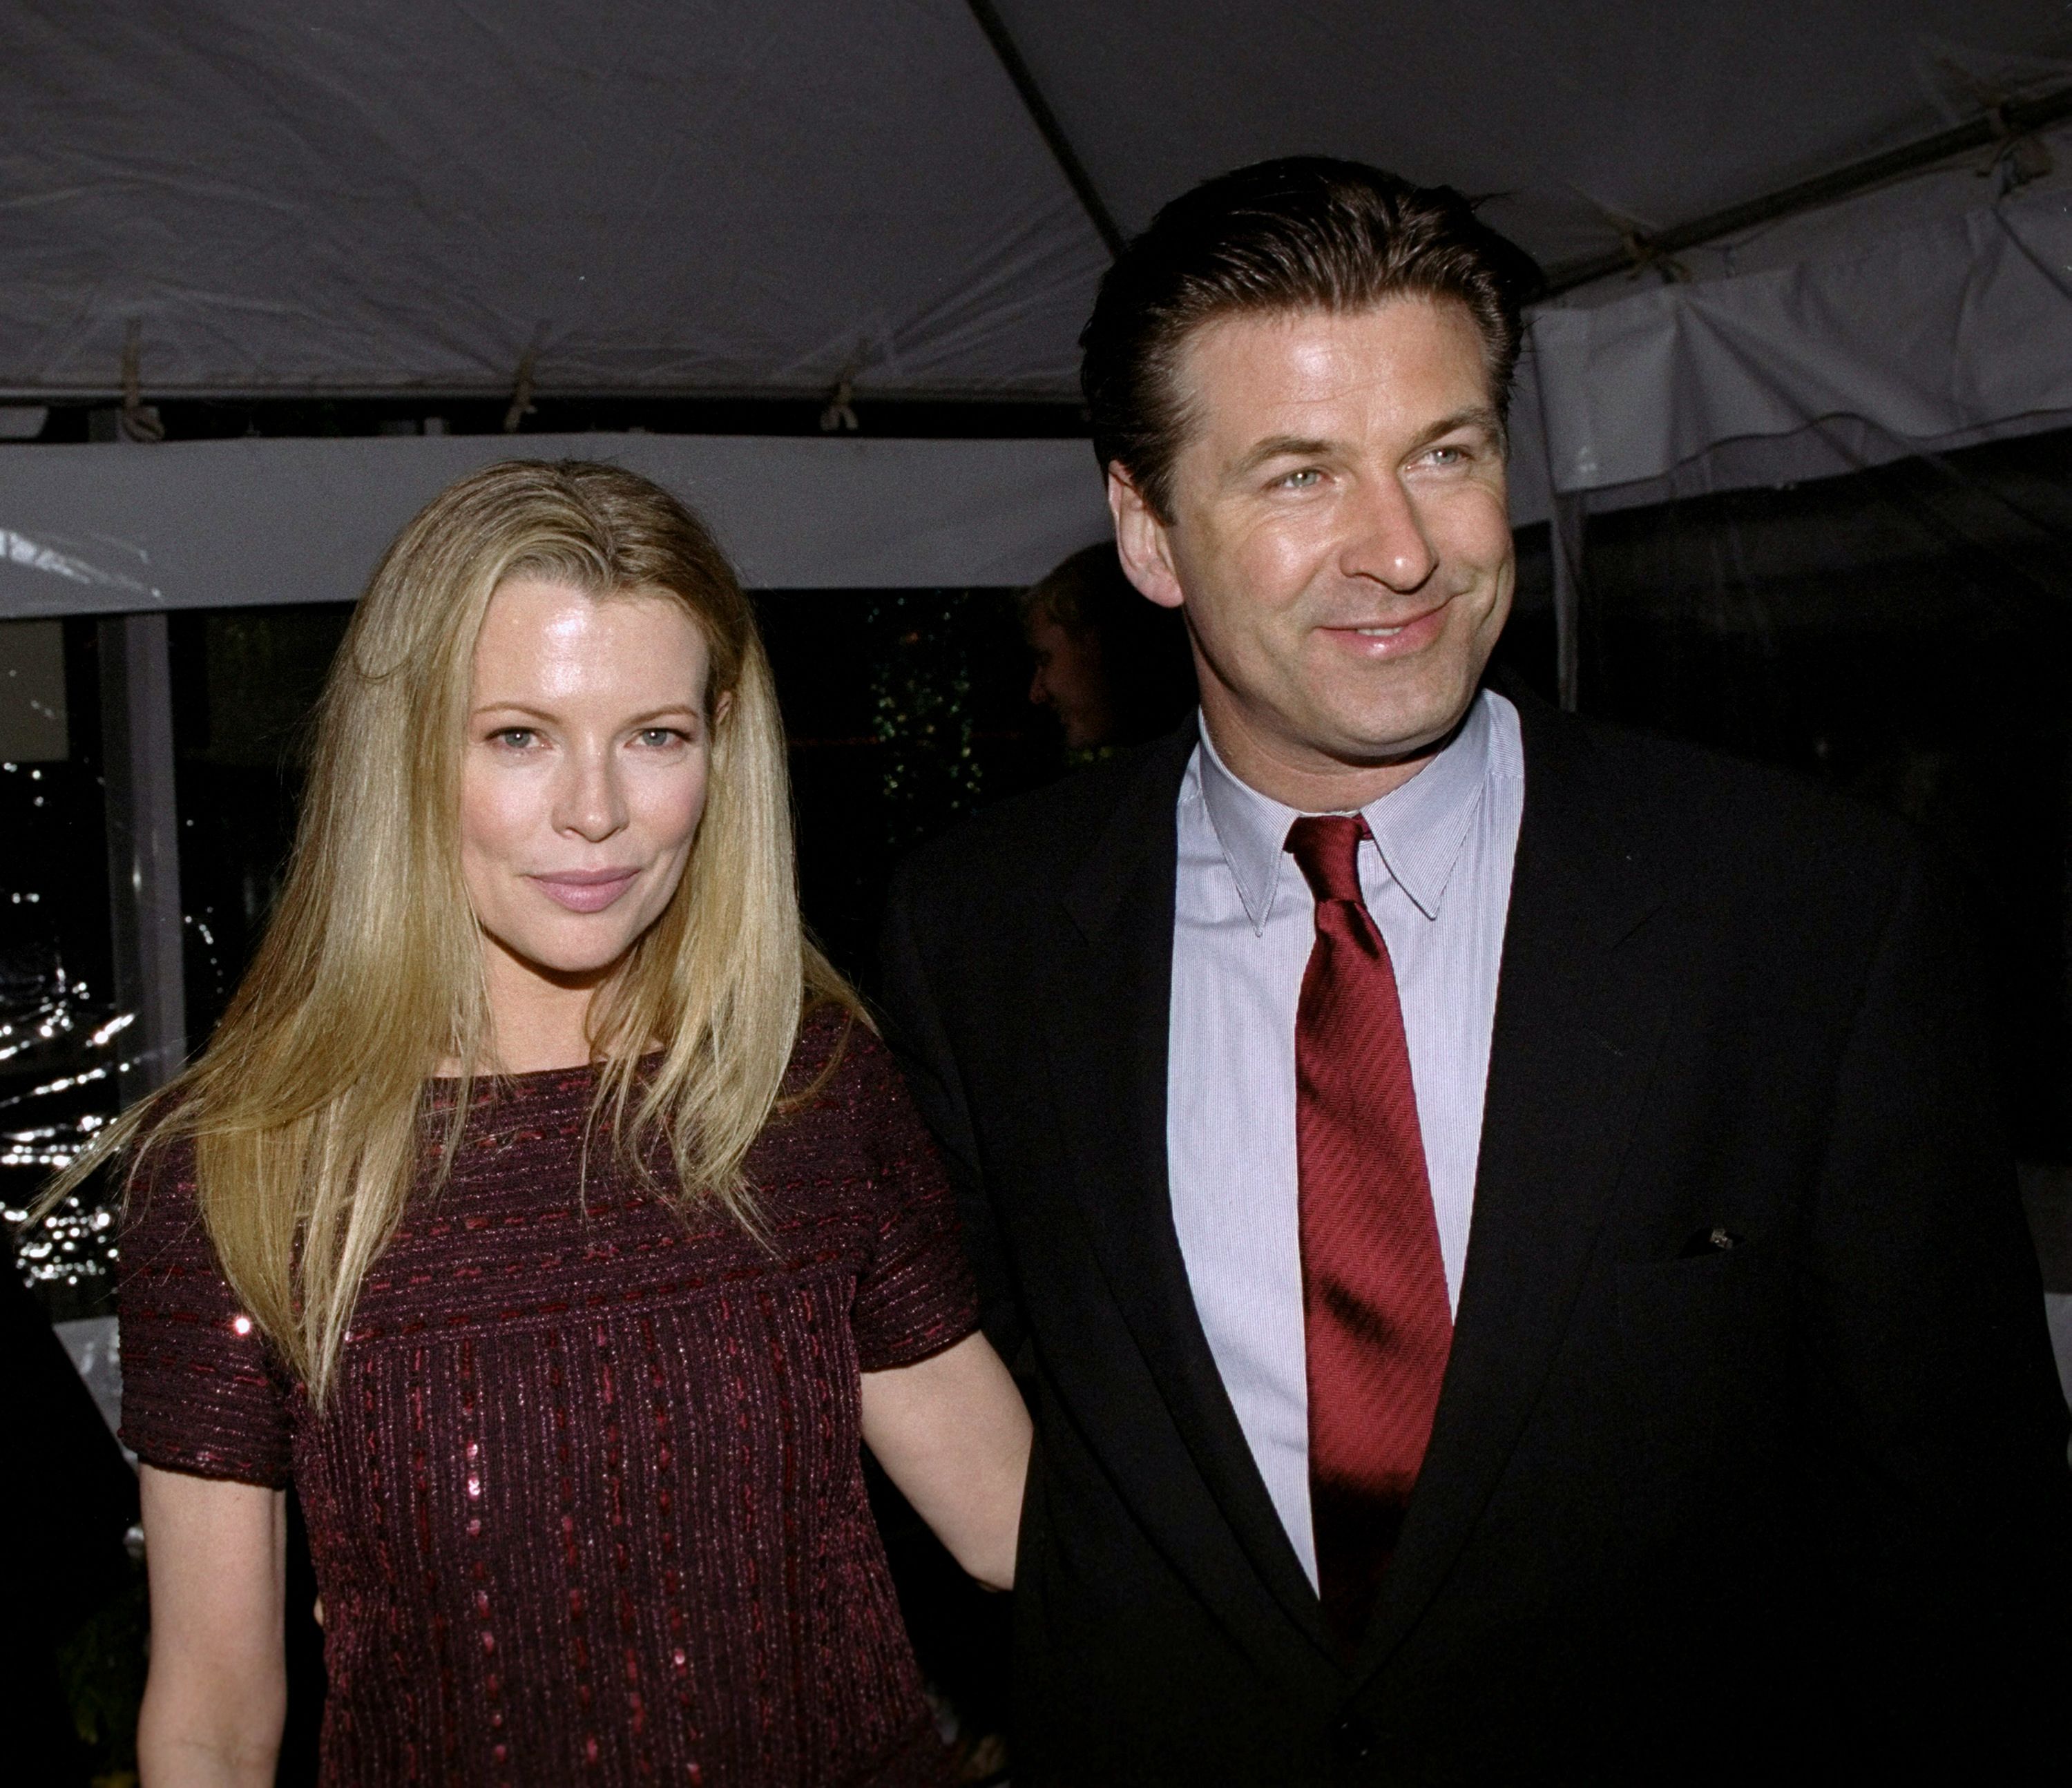  Alec Baldwin and Kim Basinger at the premiere of "I Dreamed Of Africa" in 2000 | Source: Getty Images